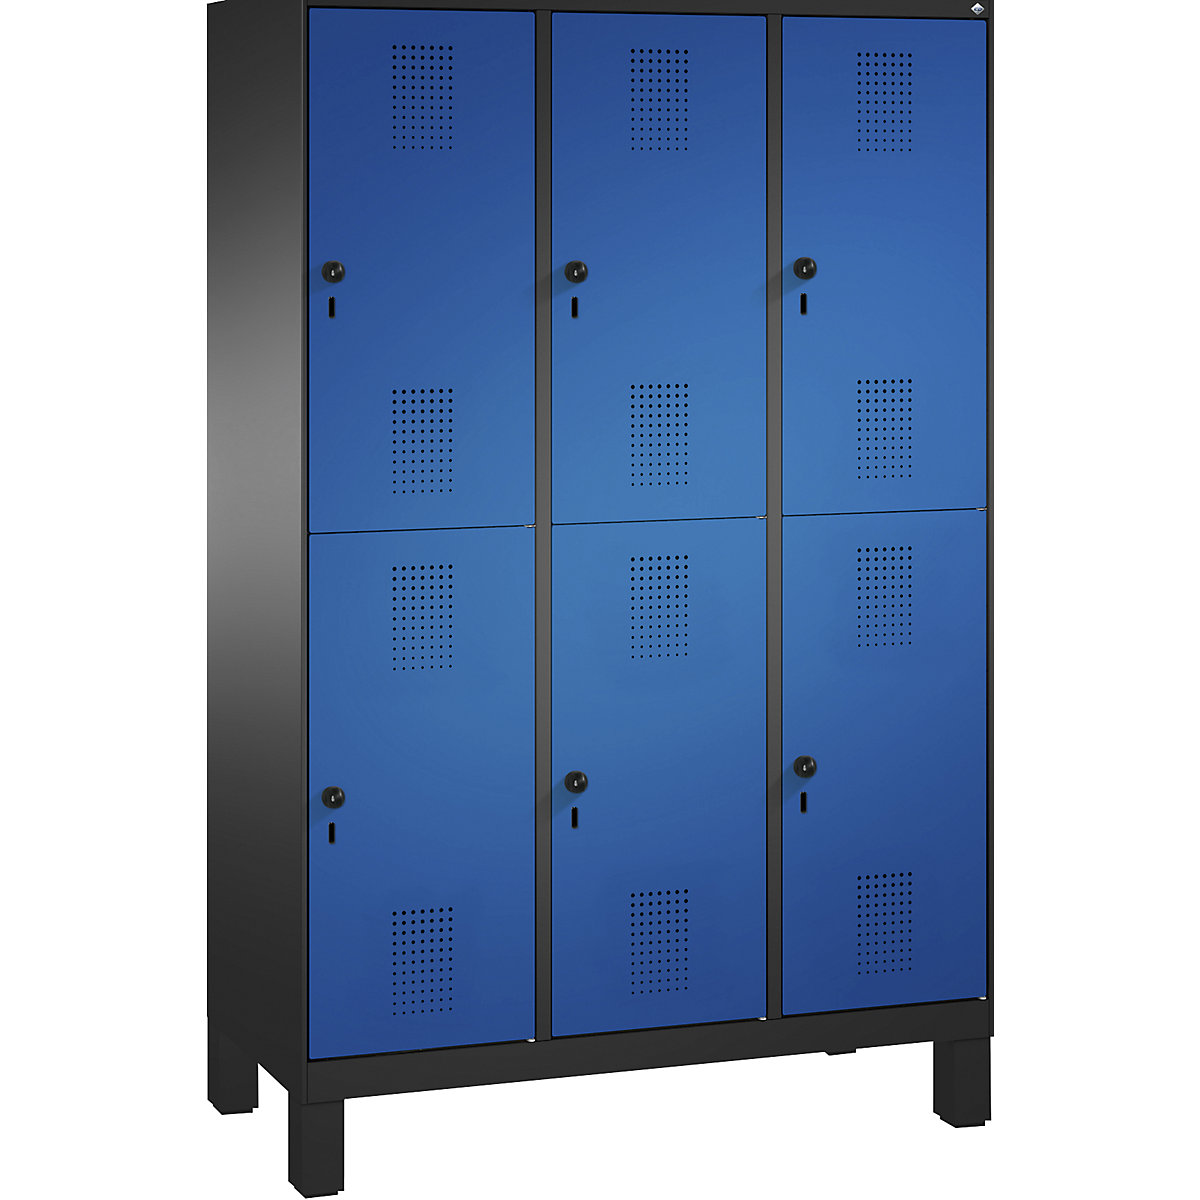 EVOLO cloakroom locker, double tier, with feet – C+P, 3 compartments, 2 shelf compartments each, compartment width 400 mm, black grey / gentian blue-6